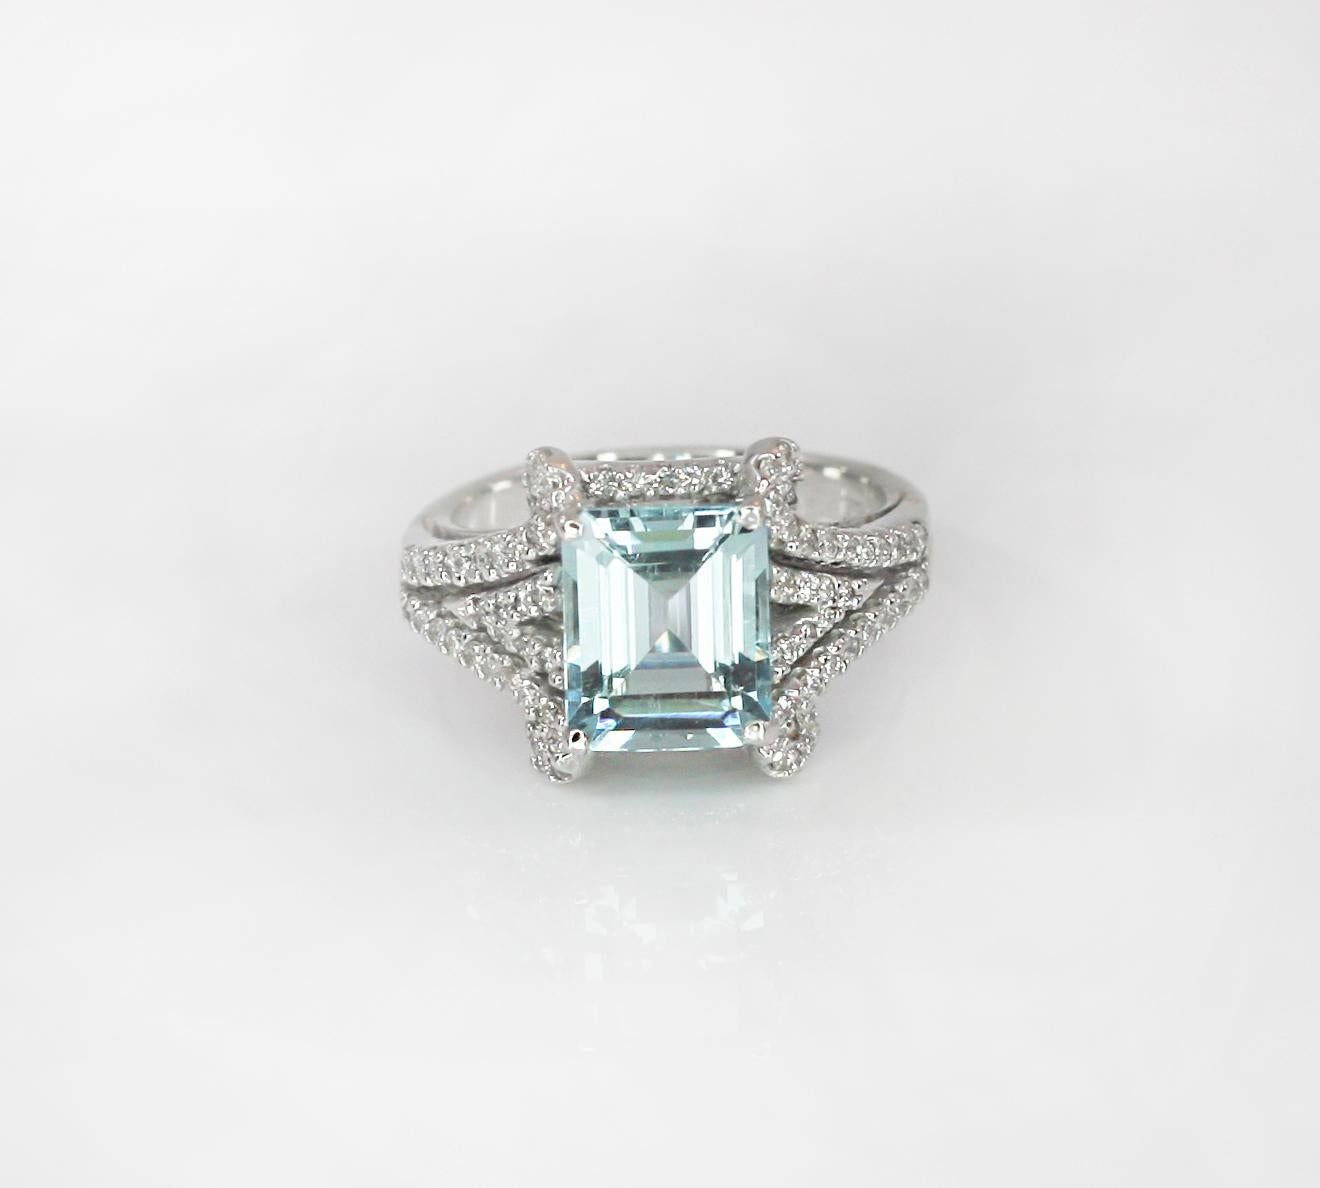 This S.Georgios designer Ring is all hand-made in White Gold 18 Karat. This stunning band ring features a solitaire Emerald cut natural Aquamarine total weight 4.36 Carat, surrounded by natural brilliant cut white Diamonds total weight of 0.40